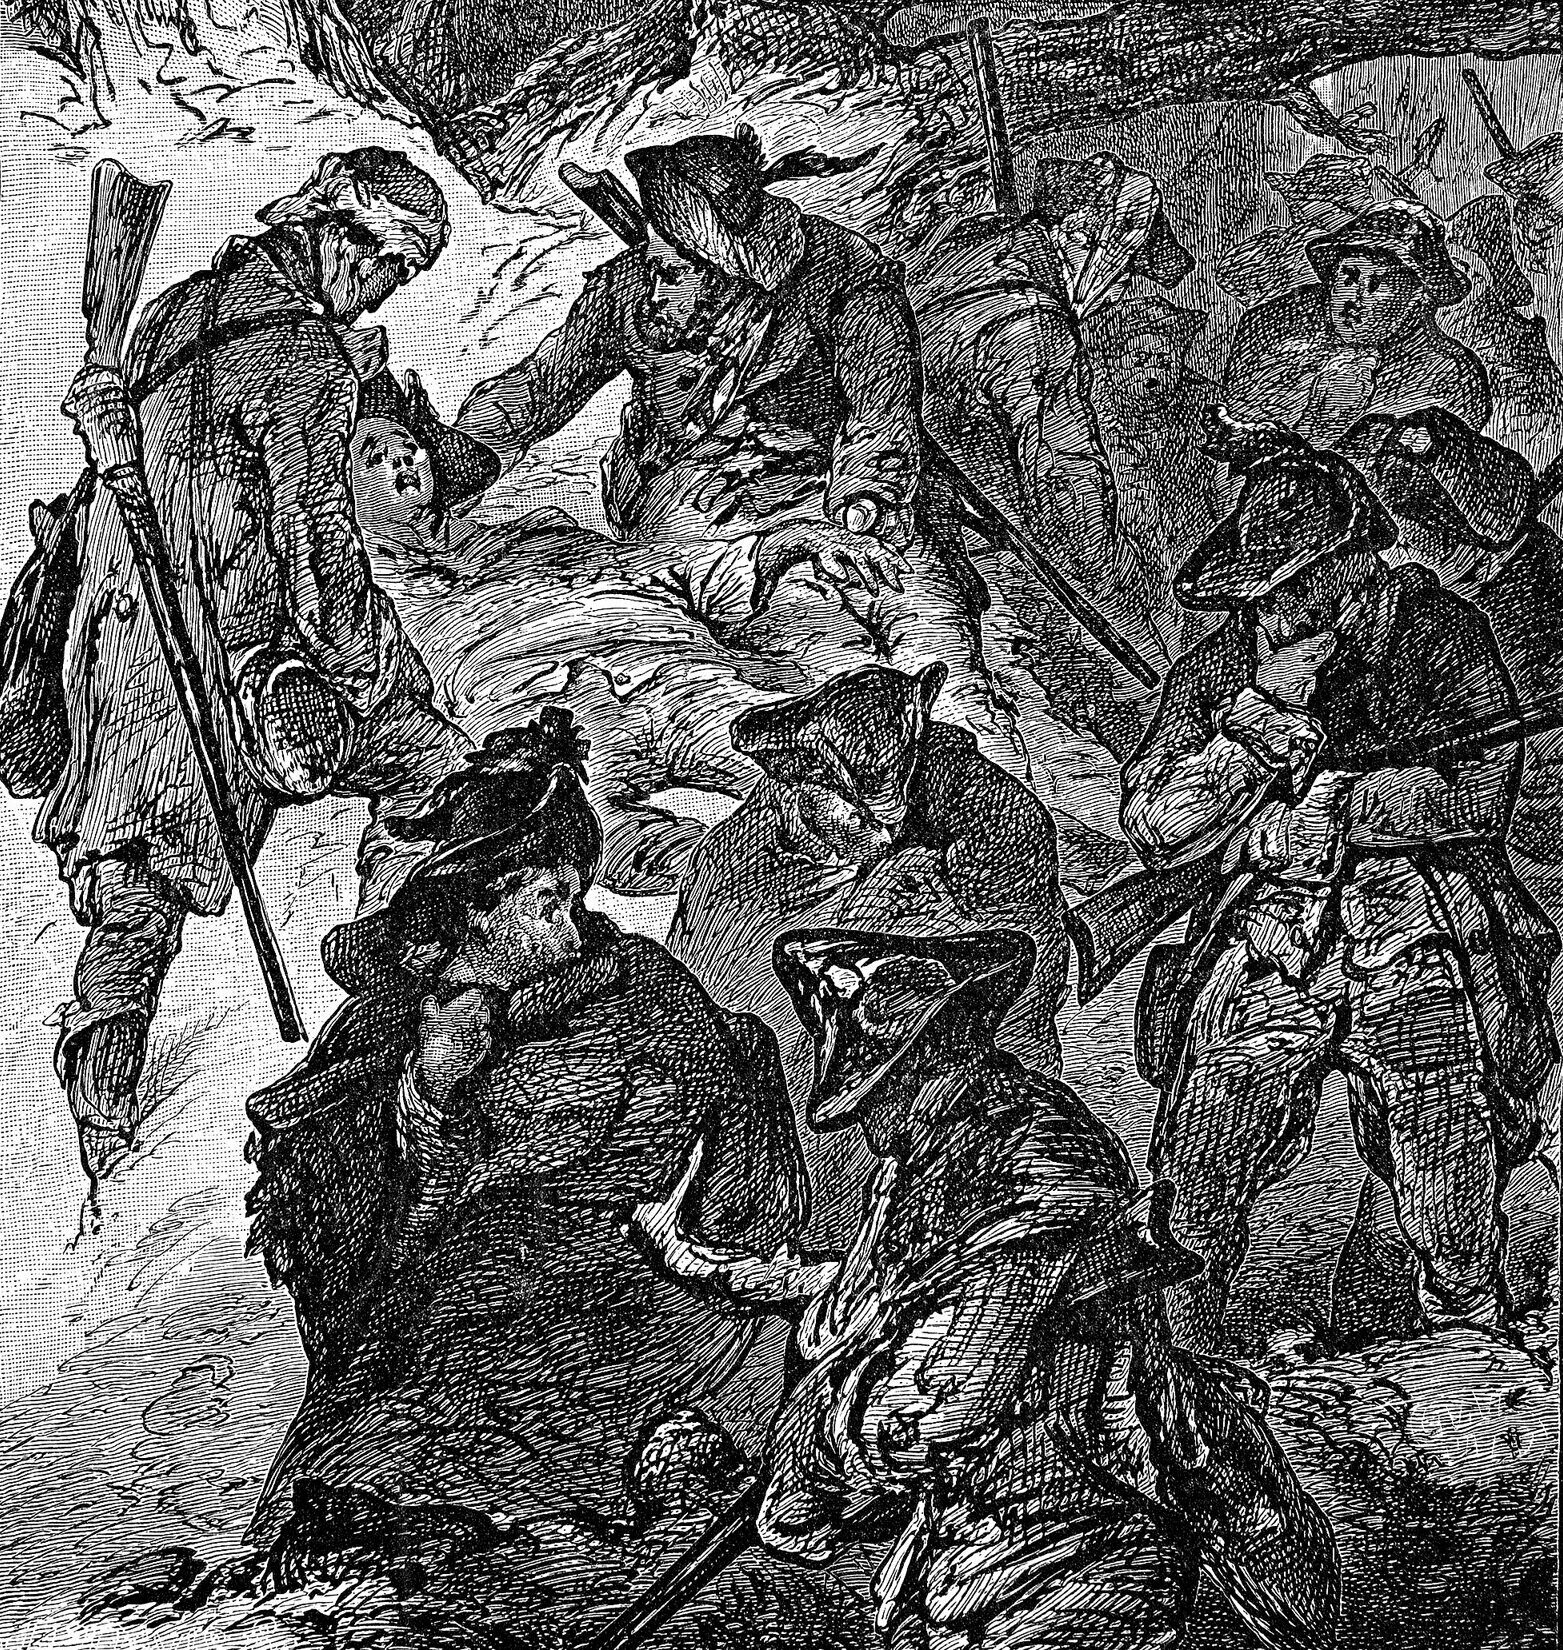 The extreme weather encountered by Arnold's expedition on its 350-mile trek resulted in a large loss of manpower. Following a council of war near the end of the march, several hundred opted to return home.